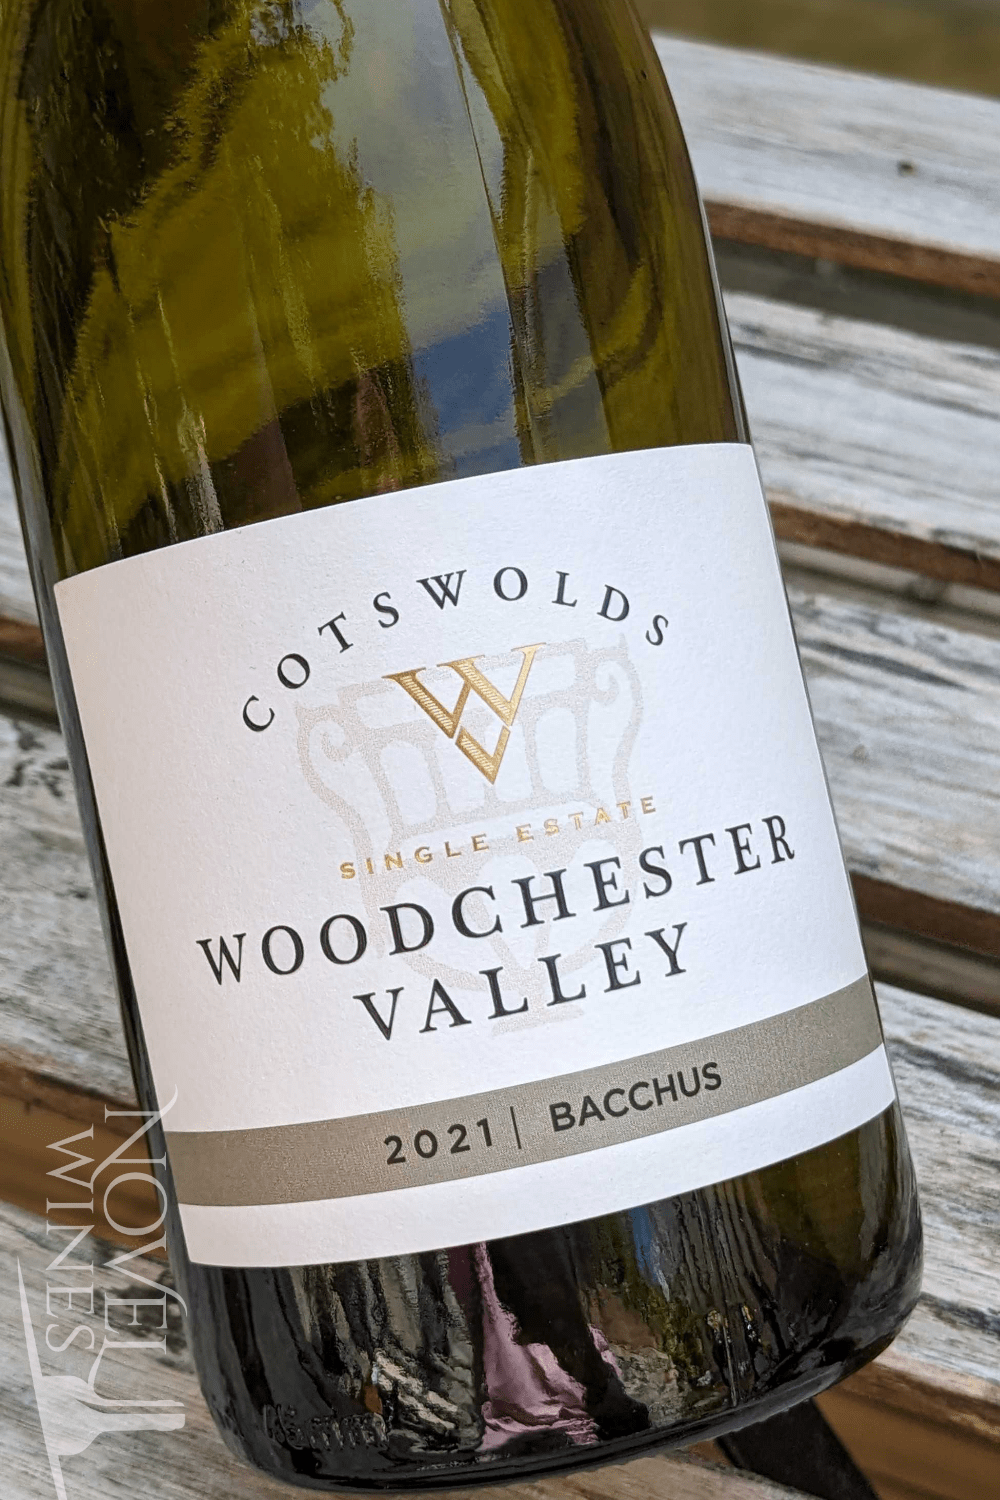 Woodchester Valley Vineyard White Wine Woodchester Valley Bacchus 2021, England